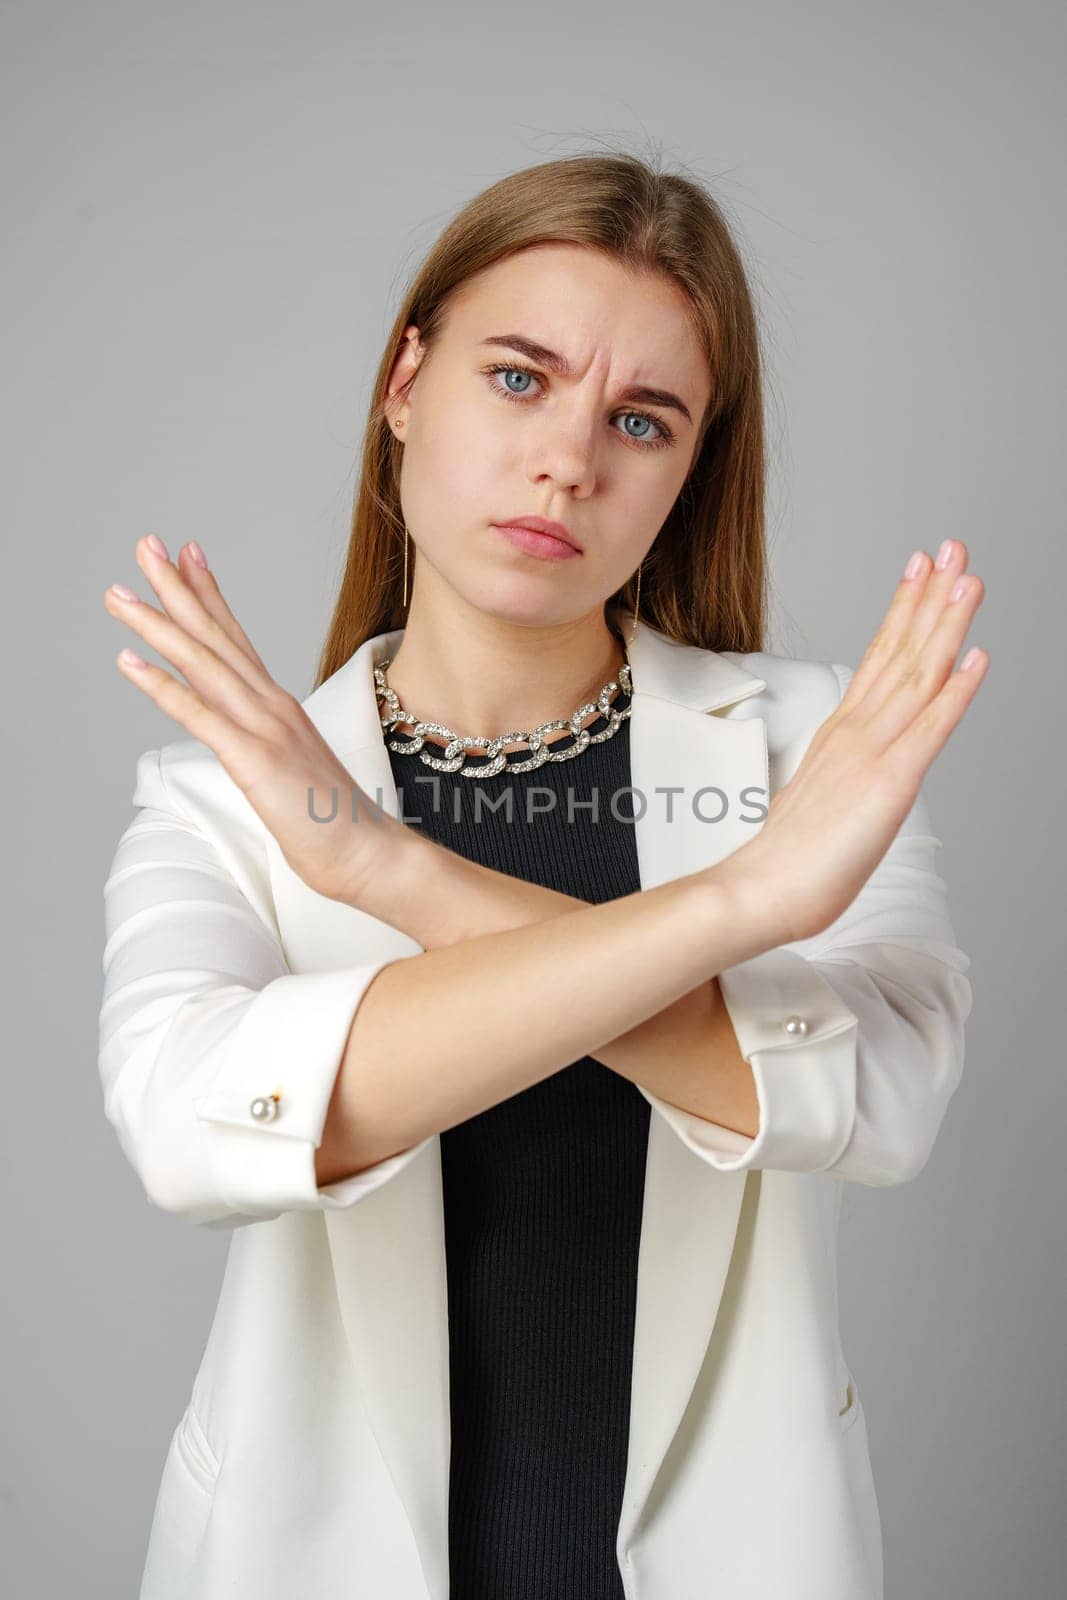 Woman in White Jacket Holding Hands Crossed in studio